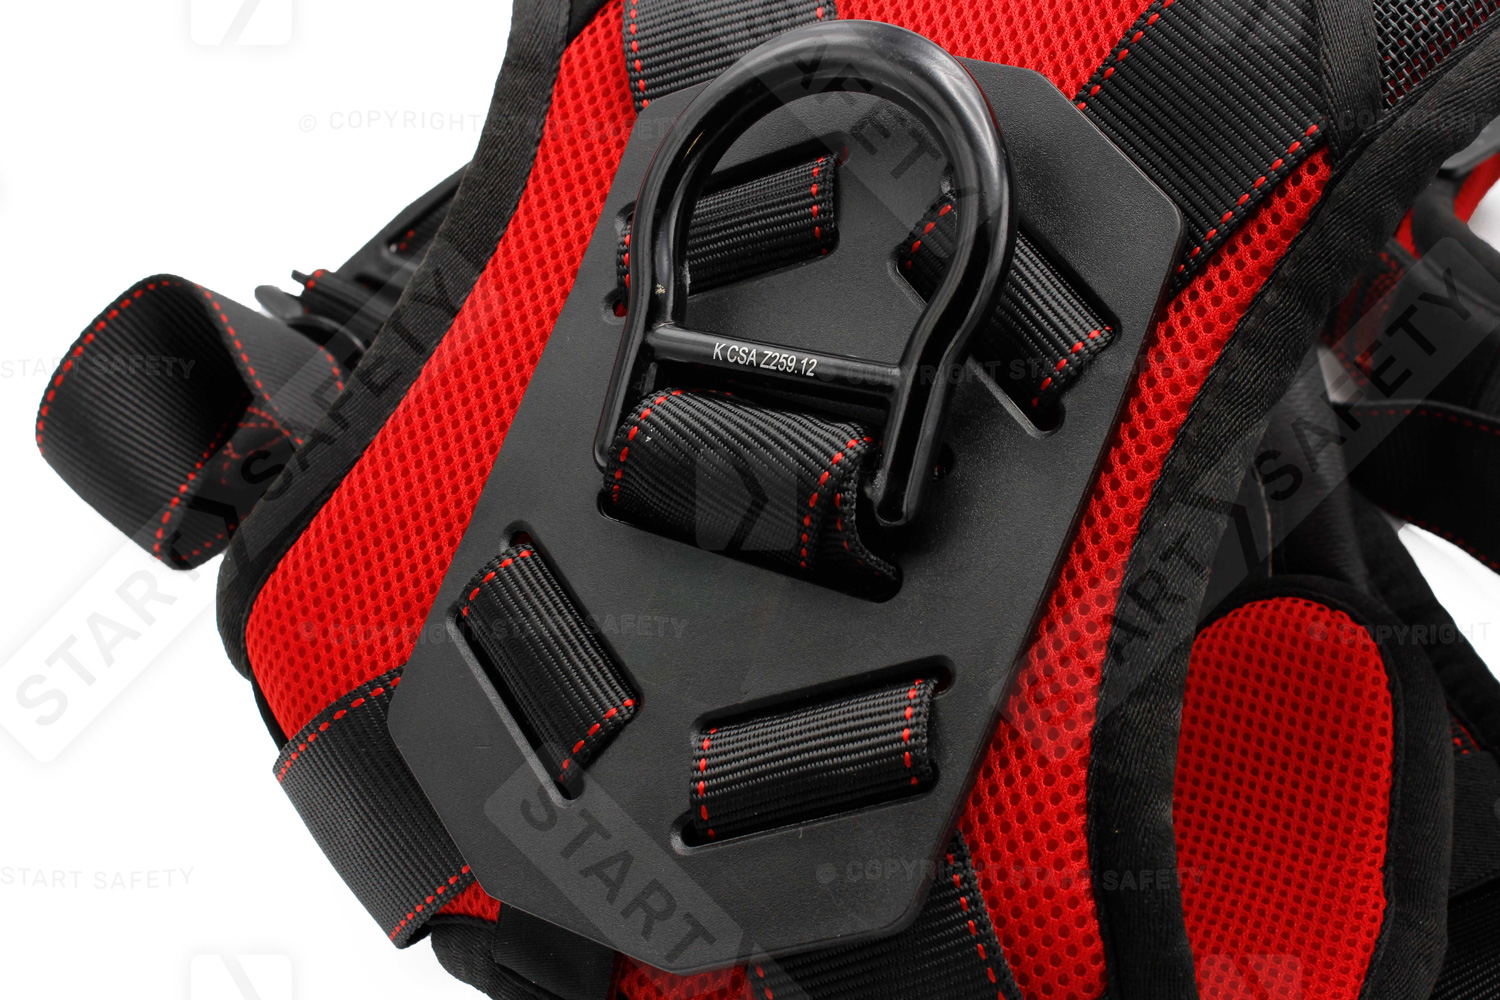 Extra Large Dorsal Plate On The JSP K2 Harness For Added Load Distribution